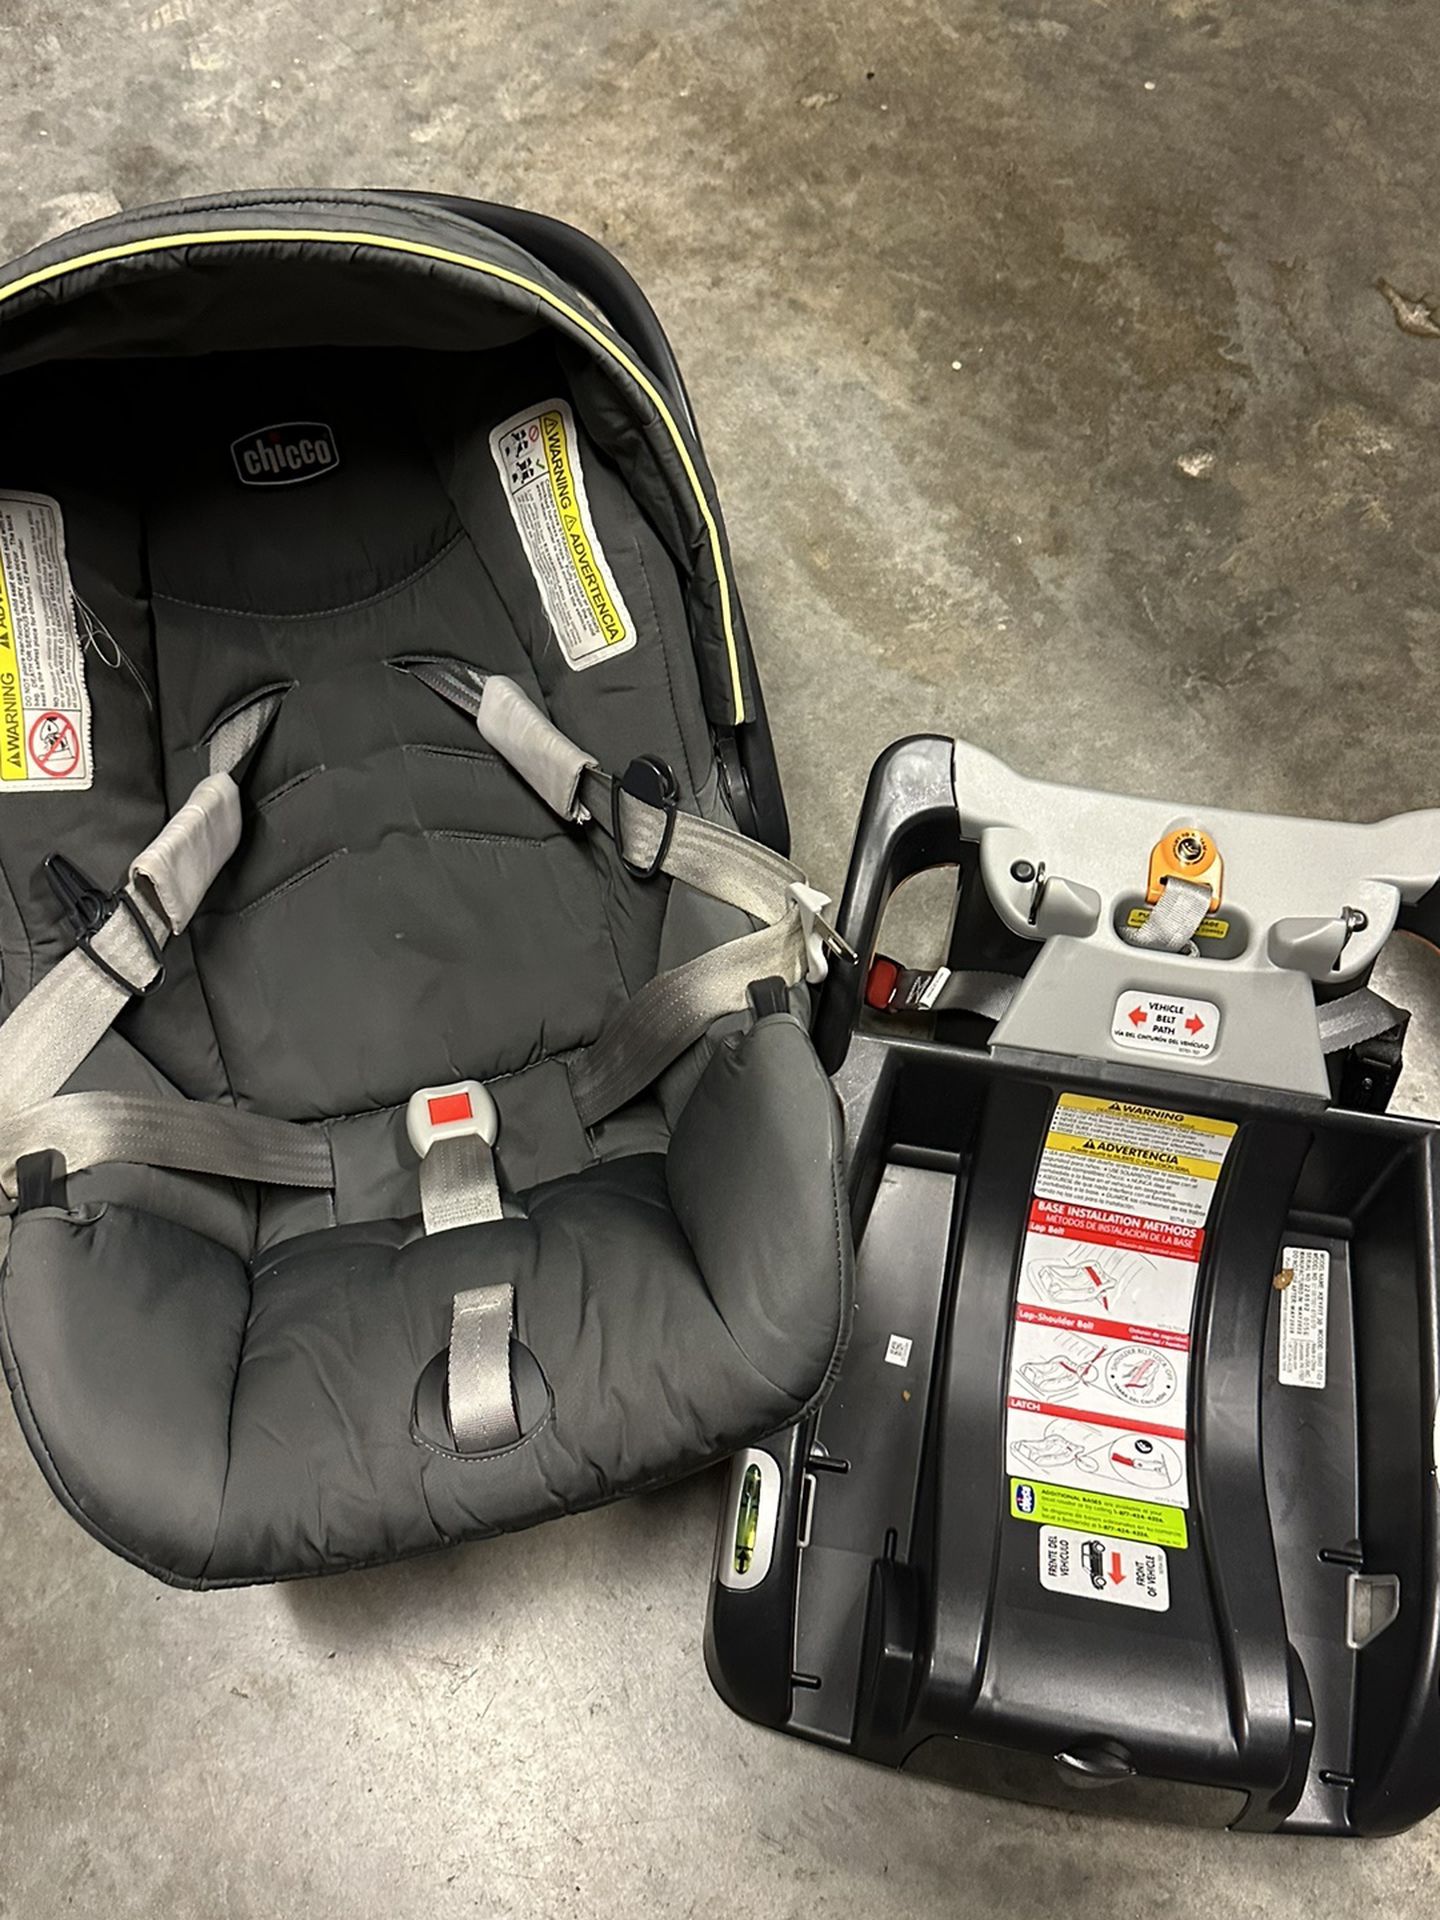 Chicco KeyFit 30 ClearTex 30 lbs Infant Car Seat - Pewter (Grey)